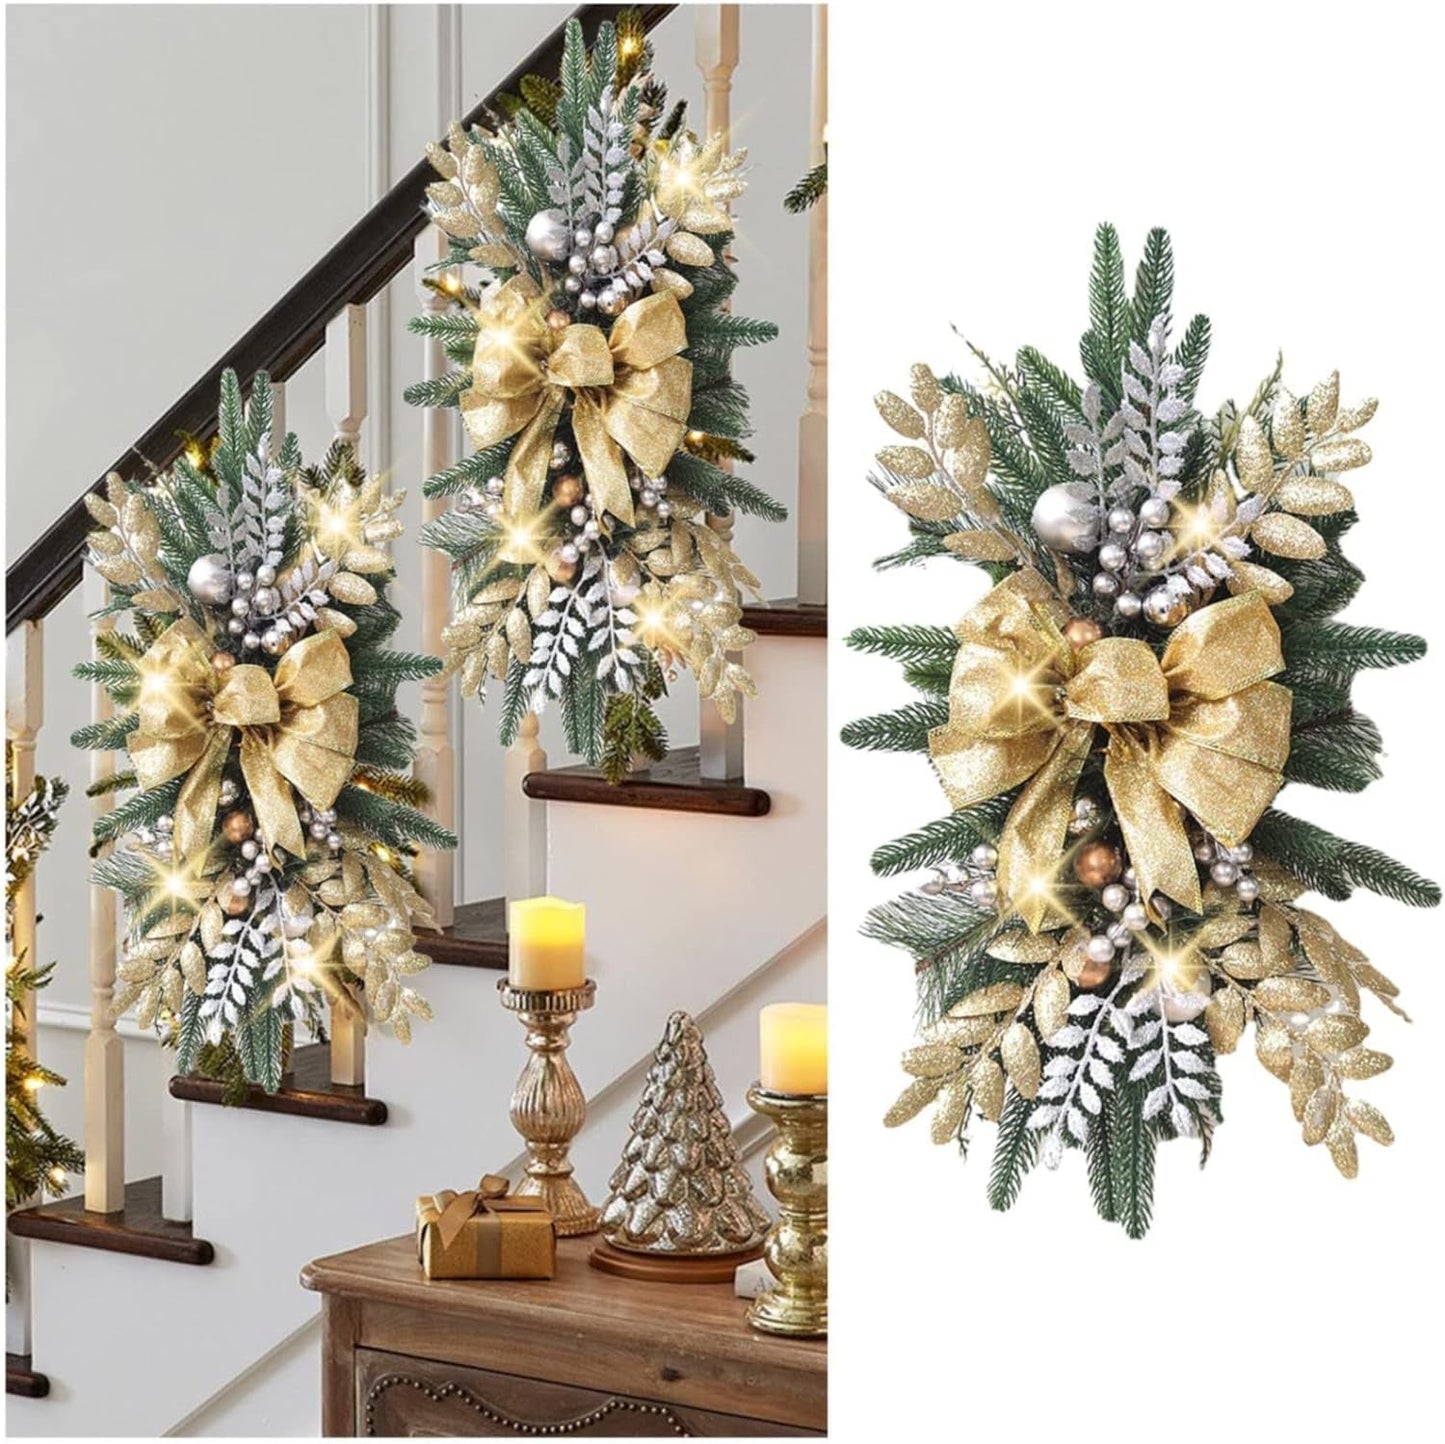 Christmas Swag, Prelit Stairs Christmas Garland with Lights, the Cordless Prelit Stairway Swag Trim Christmas Wreaths Christmas Swag for Front Door, Christmas Swags for Decorating Outdoor Home Decor